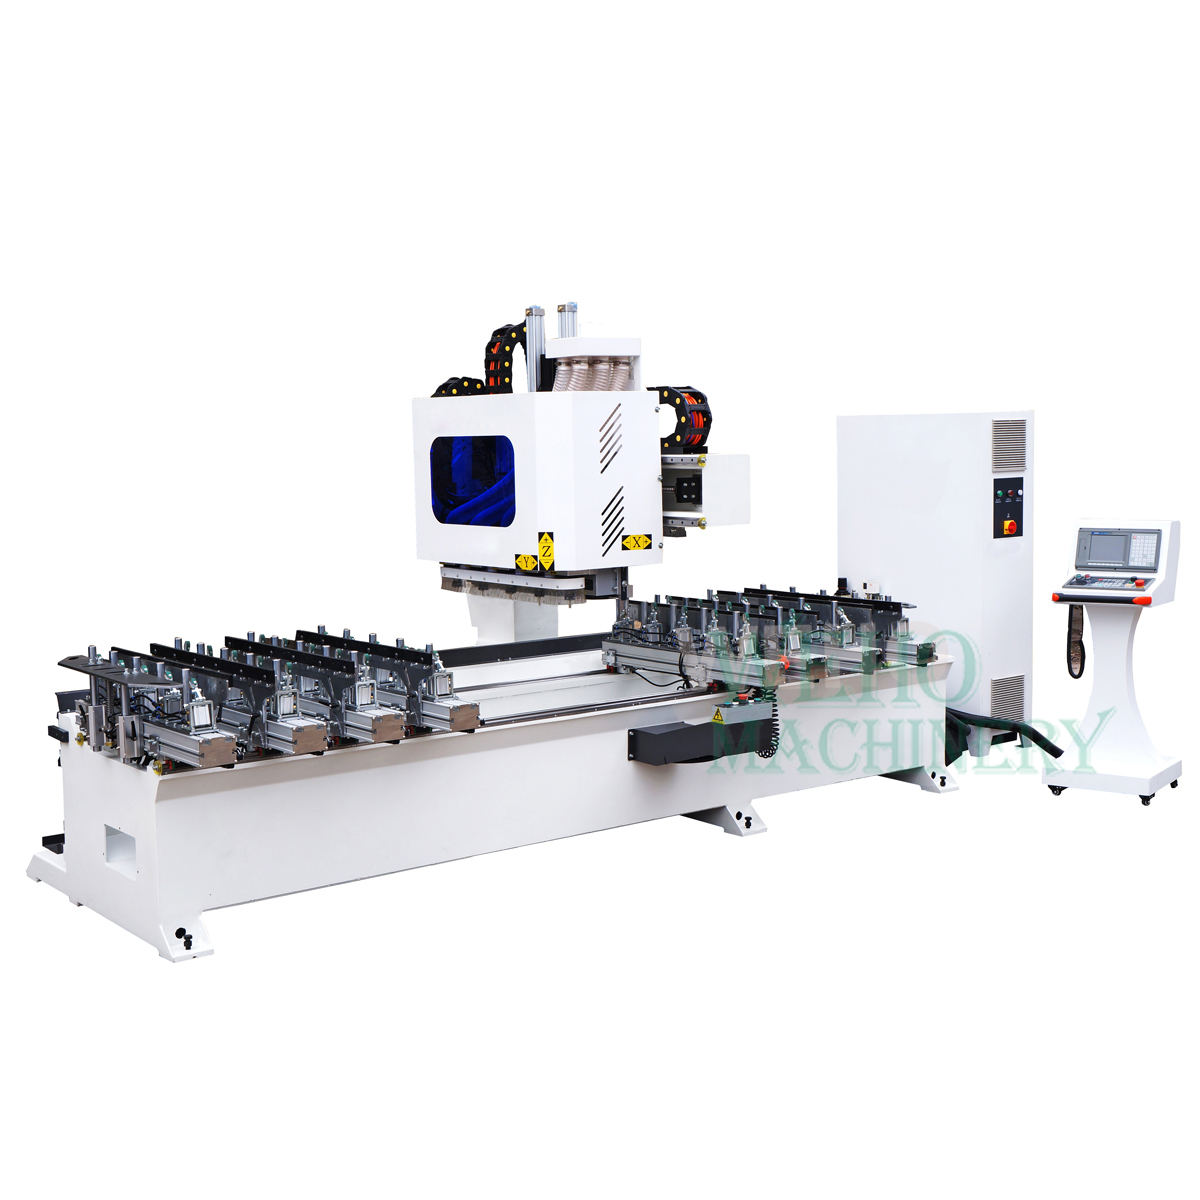 CNC four axis horizontal router mortiser machine for drilling wood